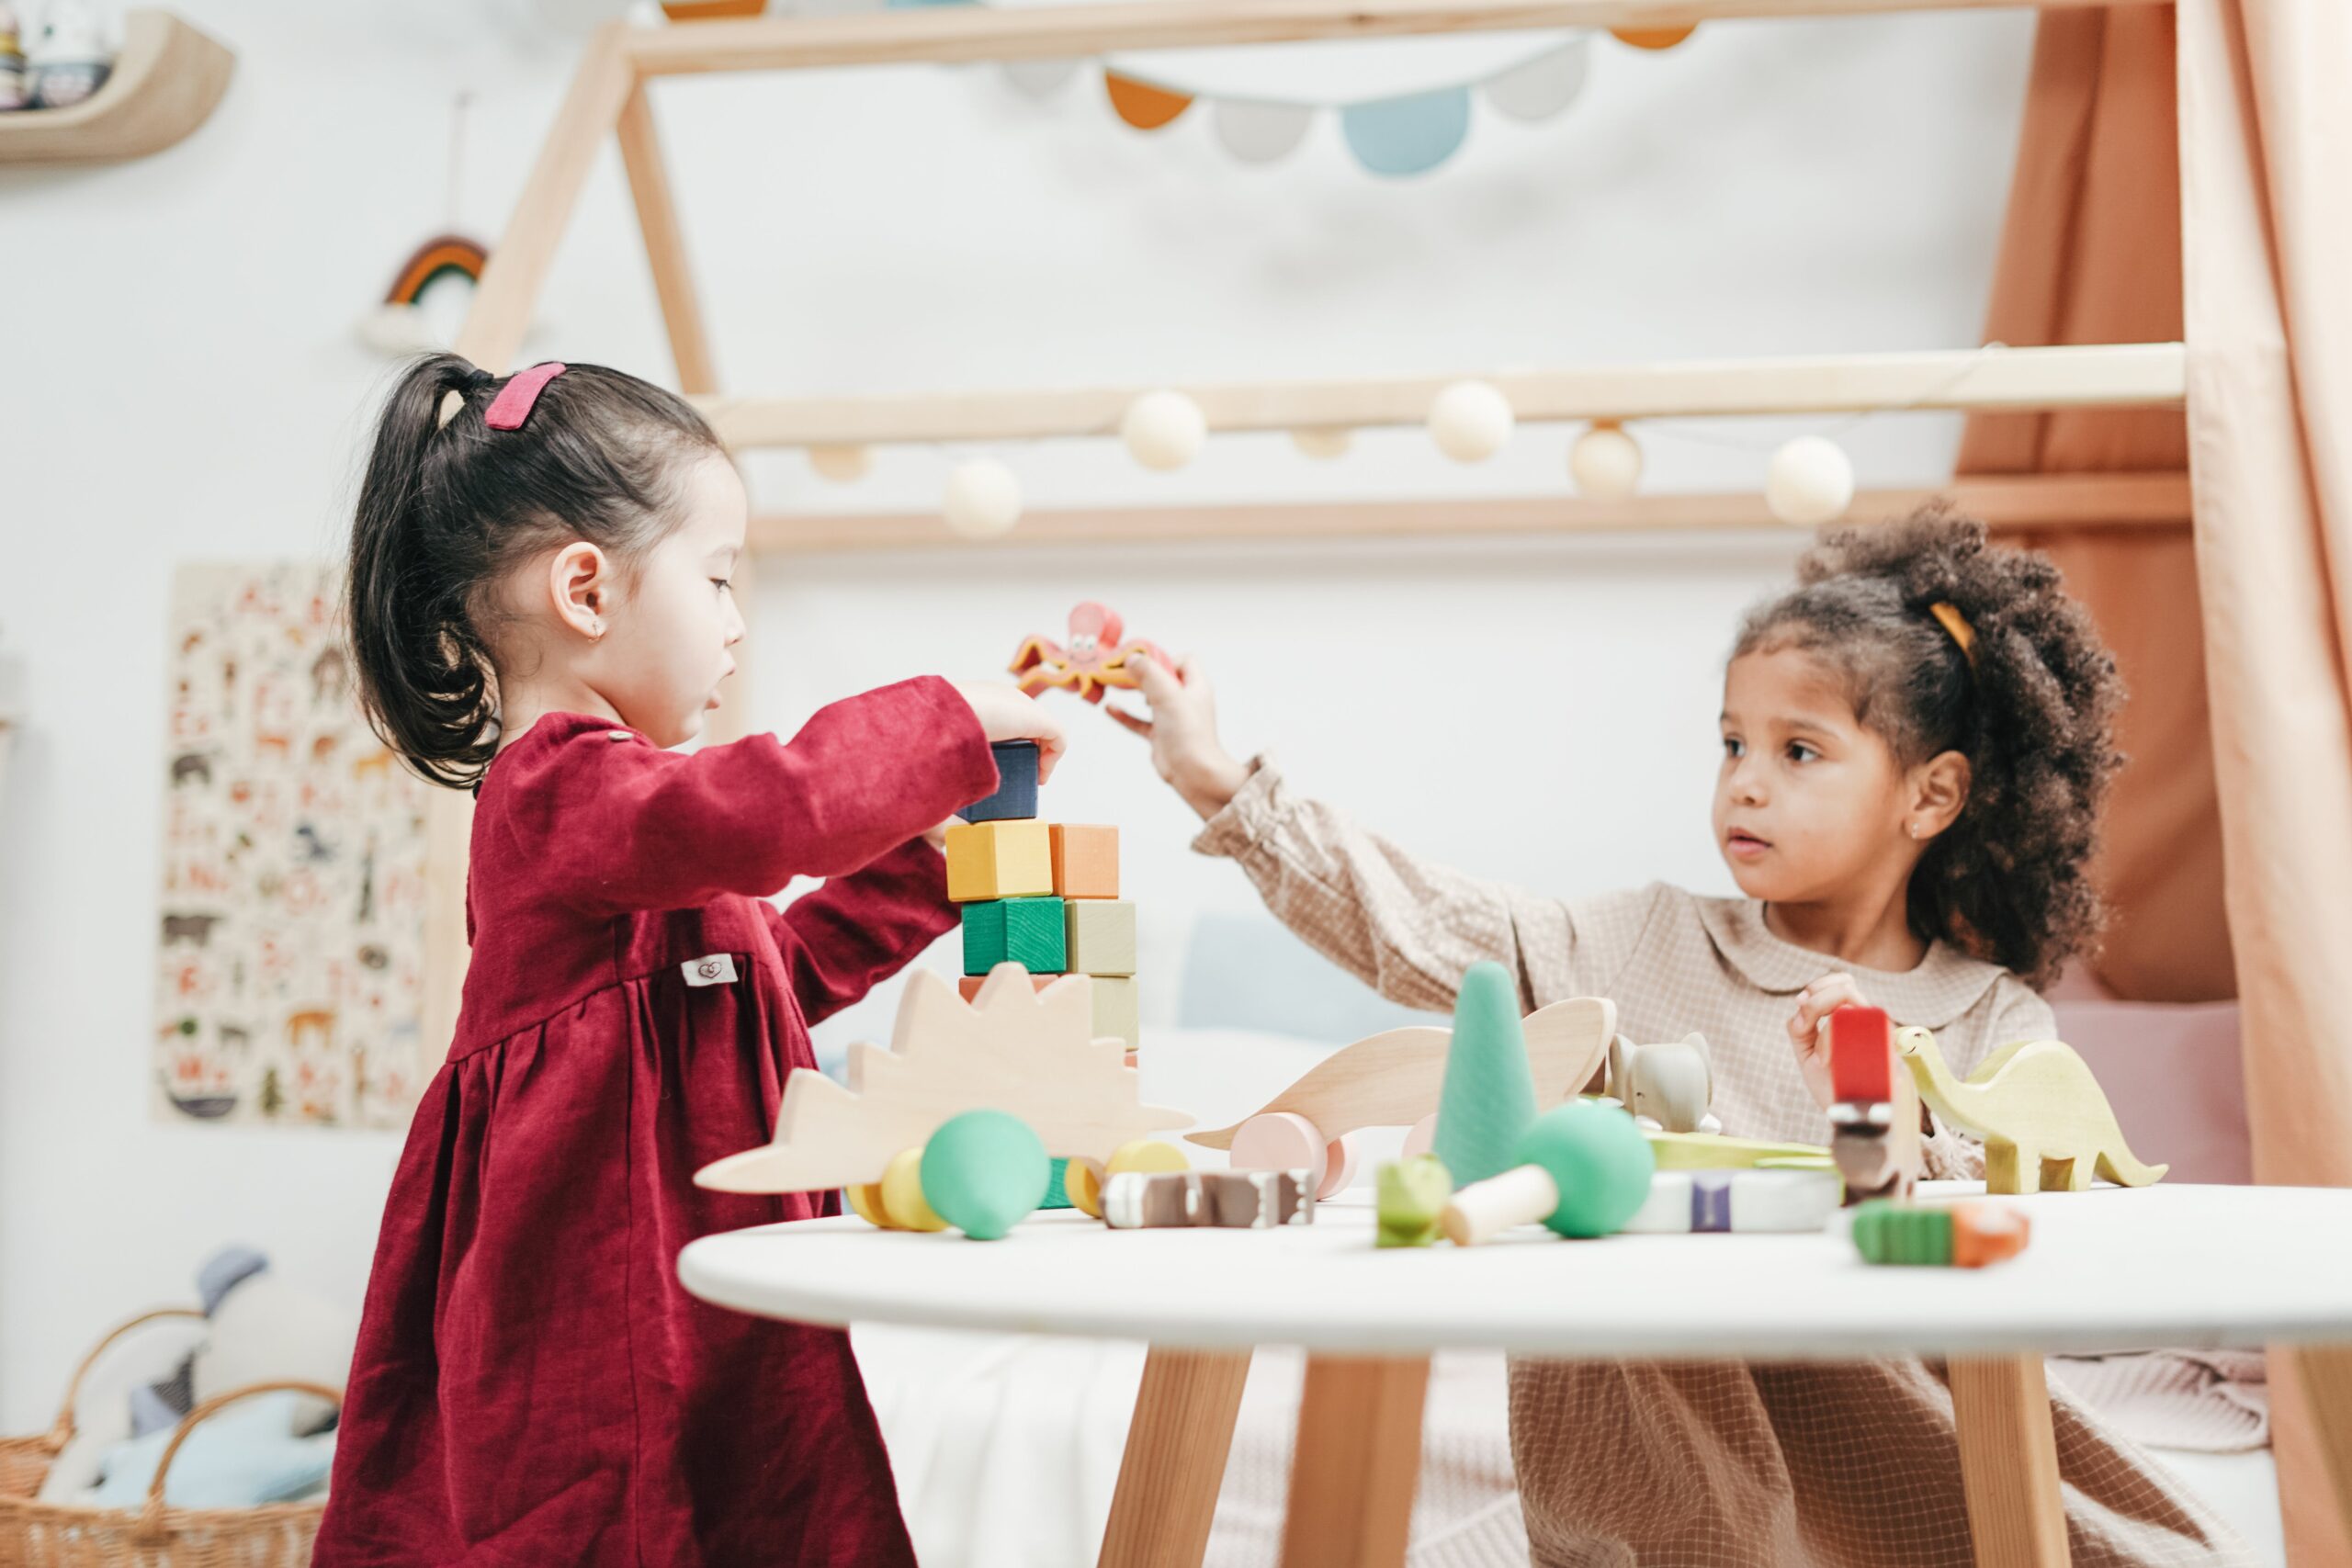 Wooden toys are not only great for a child's development, but are a safer and often more aesthetically-pleasing alternative to their plastic counterparts.